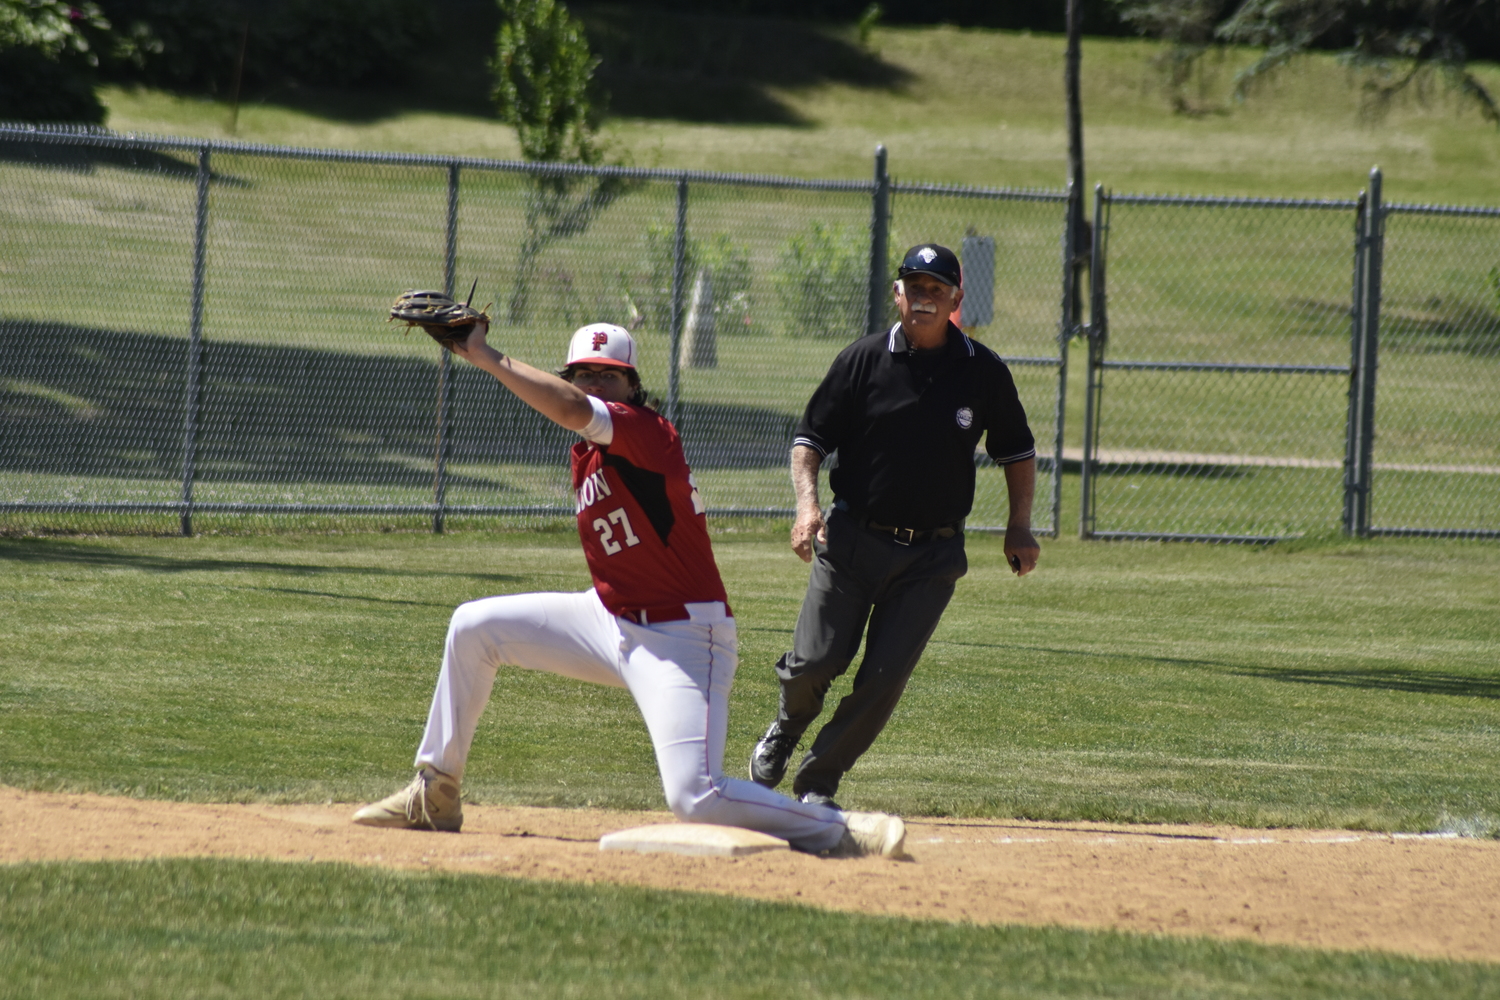 Pierson third baseman Charles Schaefer receives a throw from catcher Jeffrey Gregor with a Burke Catholic player attempting to steal a bag.   DREW BUDD